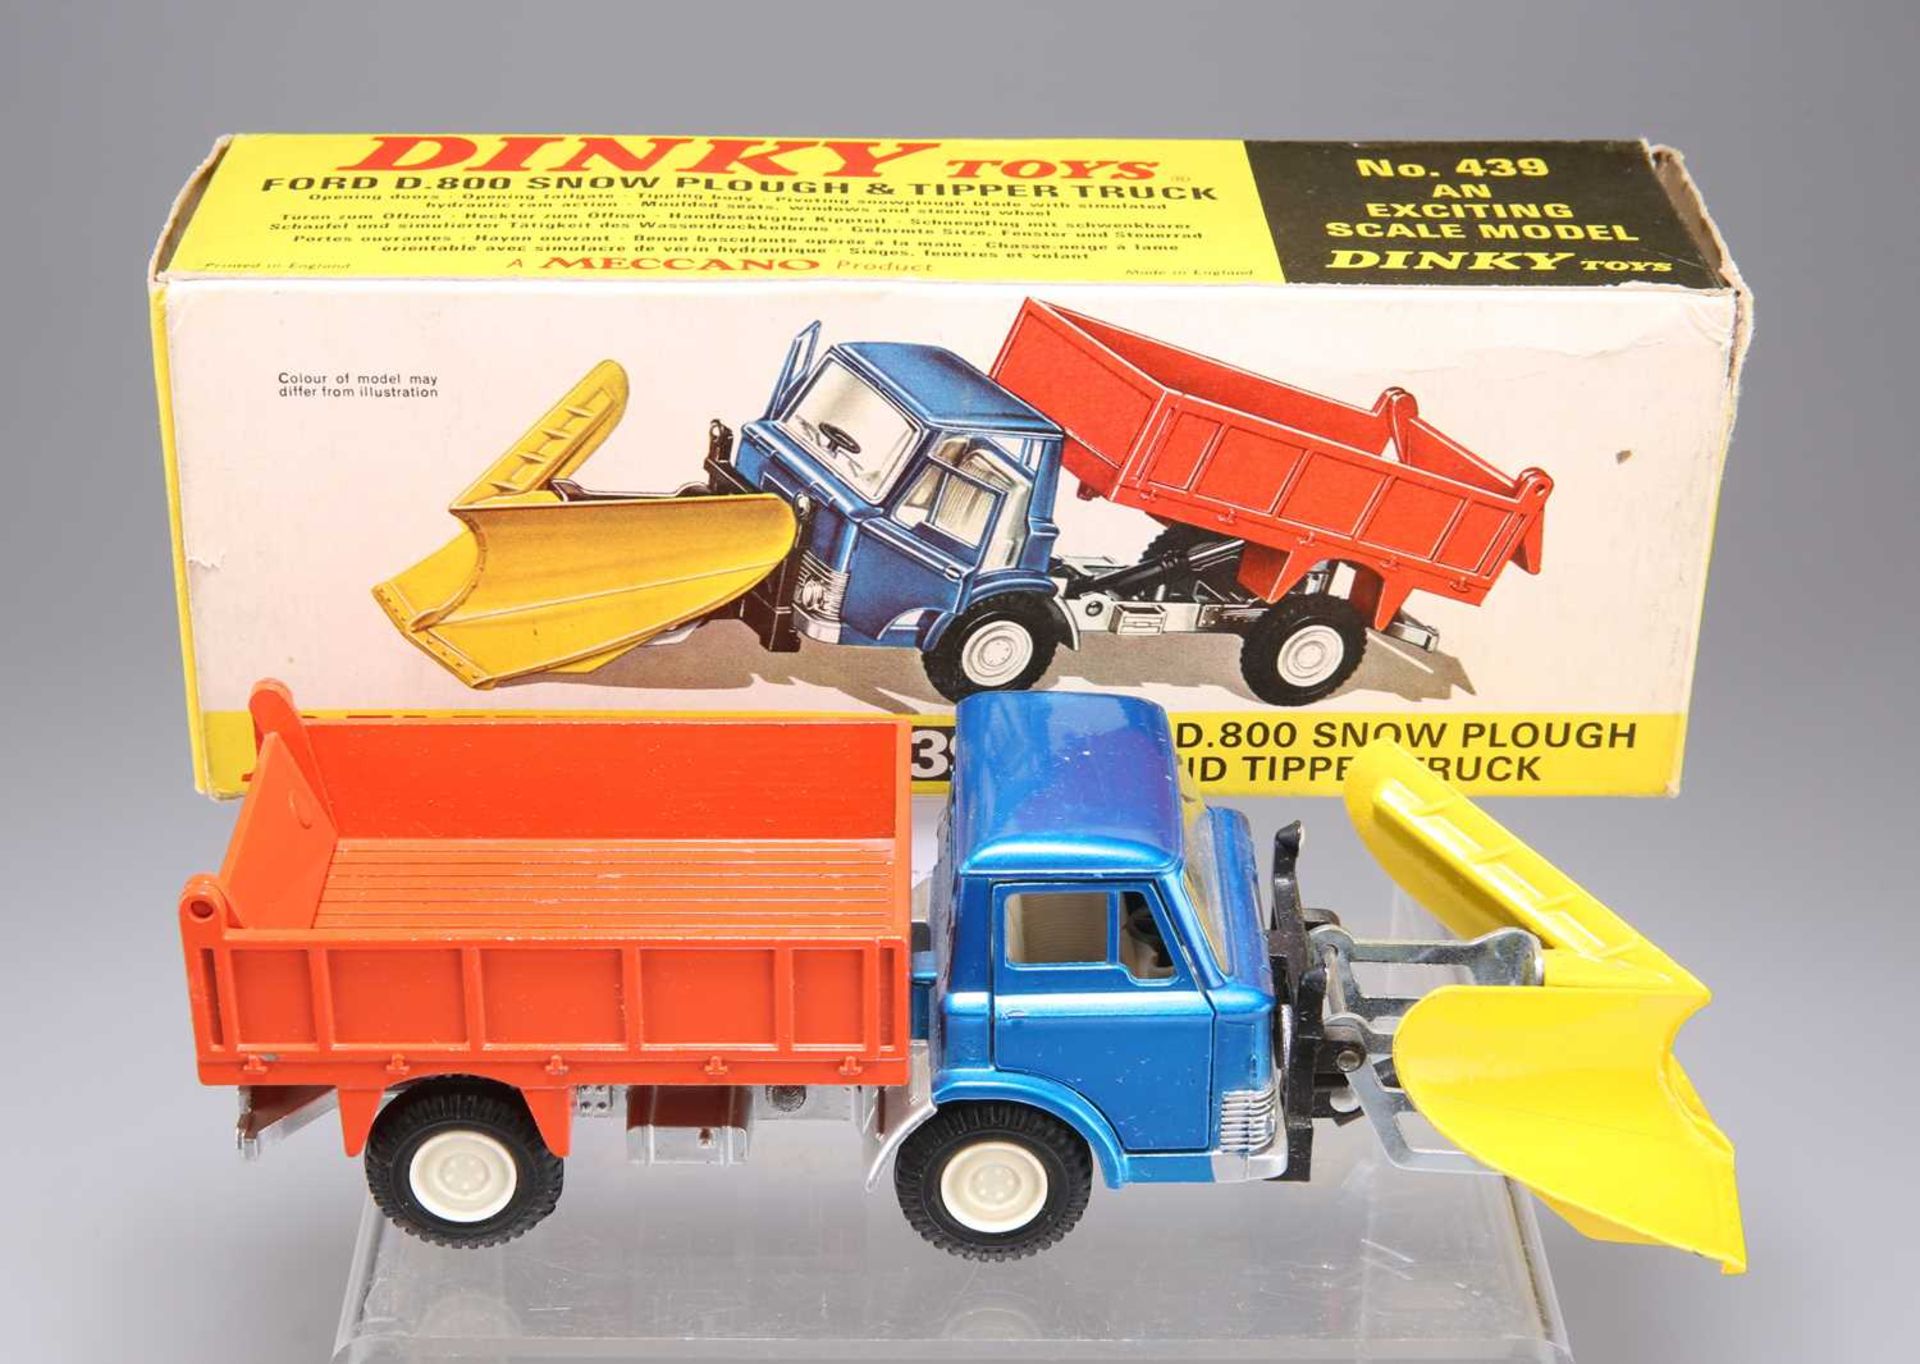 A DINKY TOY FORD D.800 SNOW PLOUGH AND TIPPER TRUCK, NO. 439 - Bild 3 aus 4